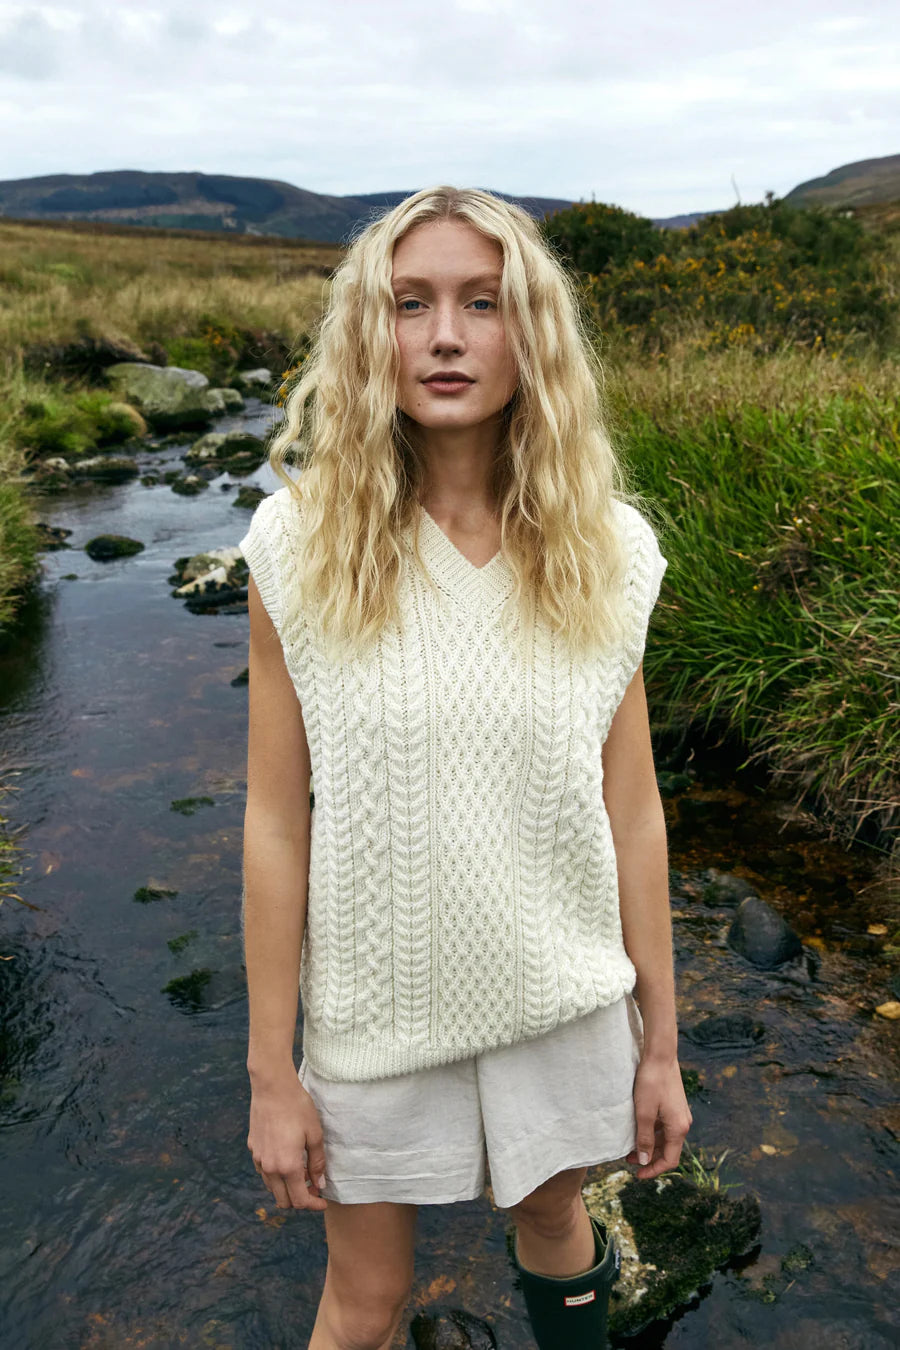 Warmth & Style — The Timeless Appeal to Irish Knitwear